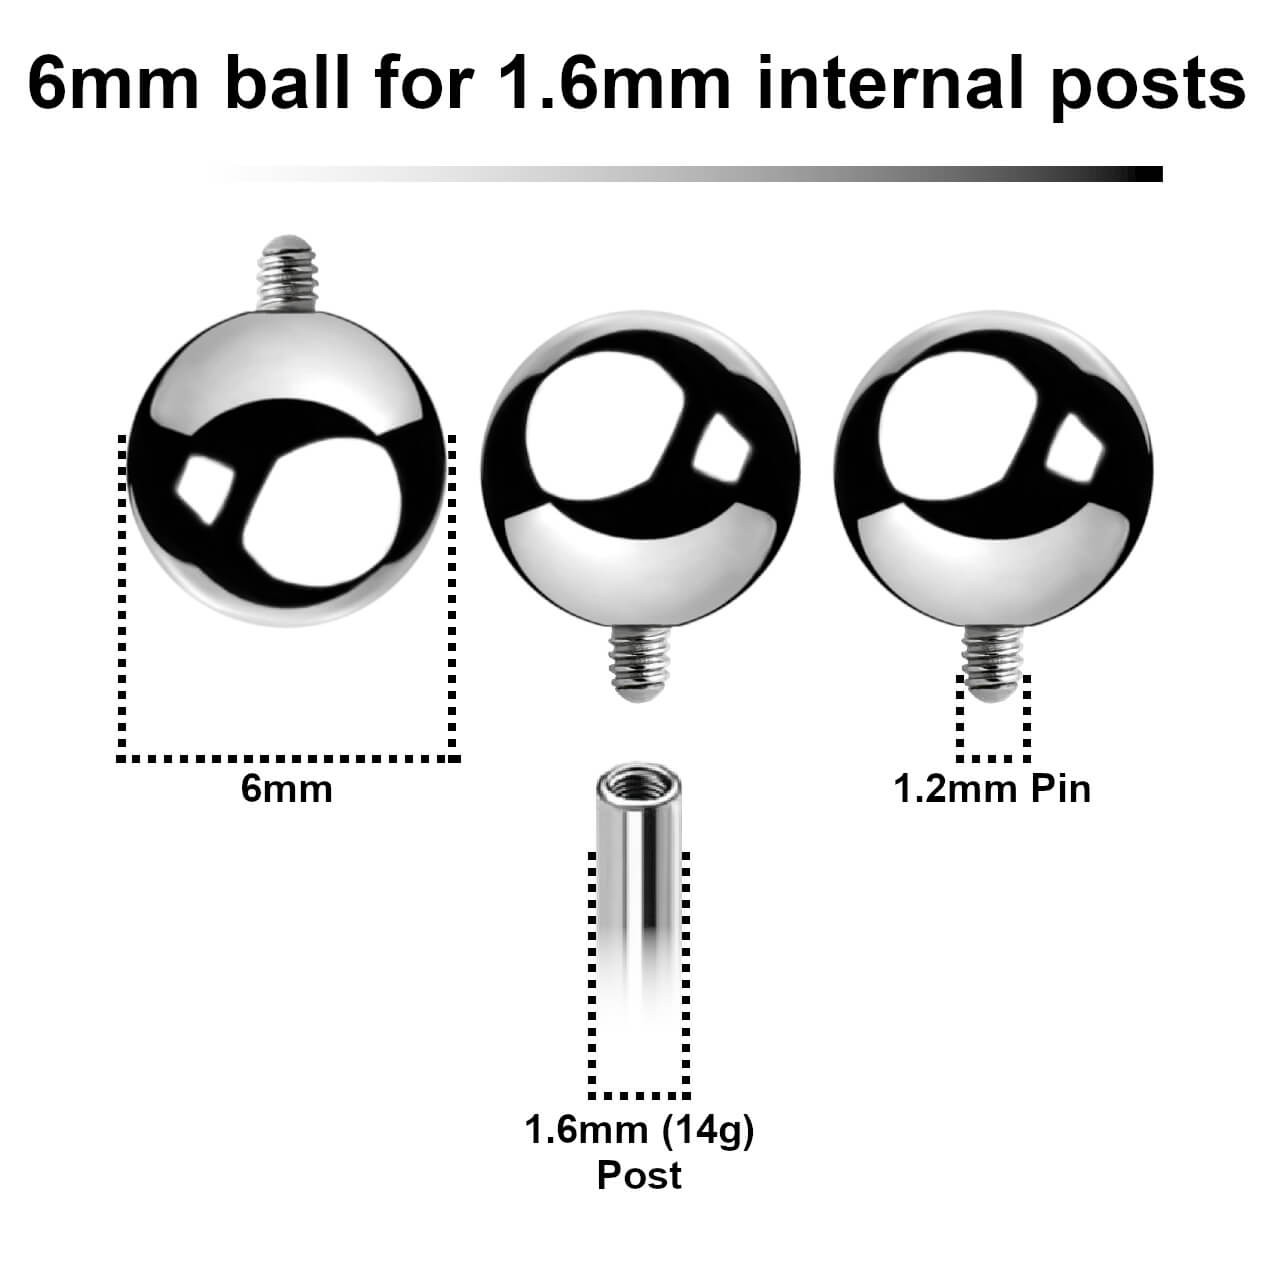 FYB16N6 Pack of 25 high polished surgical steel balls with 6mm diameter for 1.6mm internally threaded post